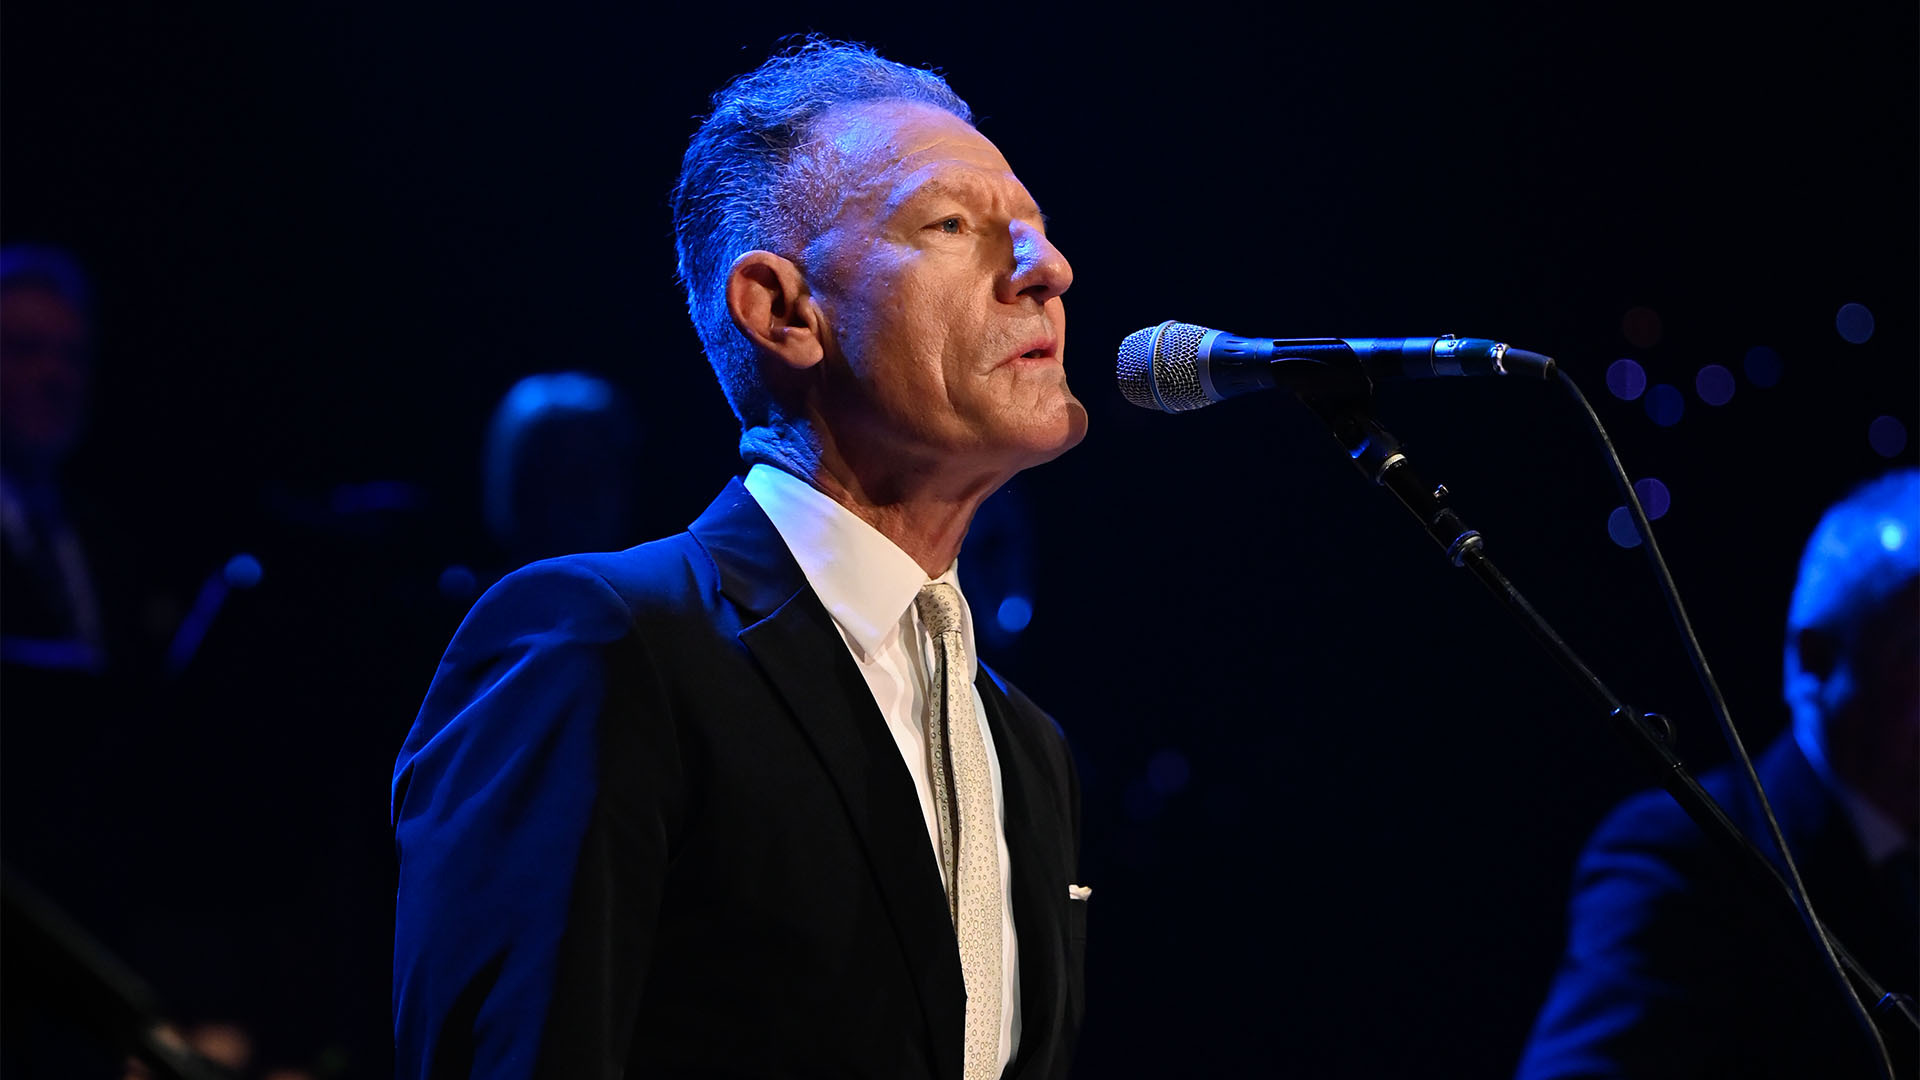 Lyle Lovett stands in front of a mic and performs live at Austin City Limits in Austin, Texas.